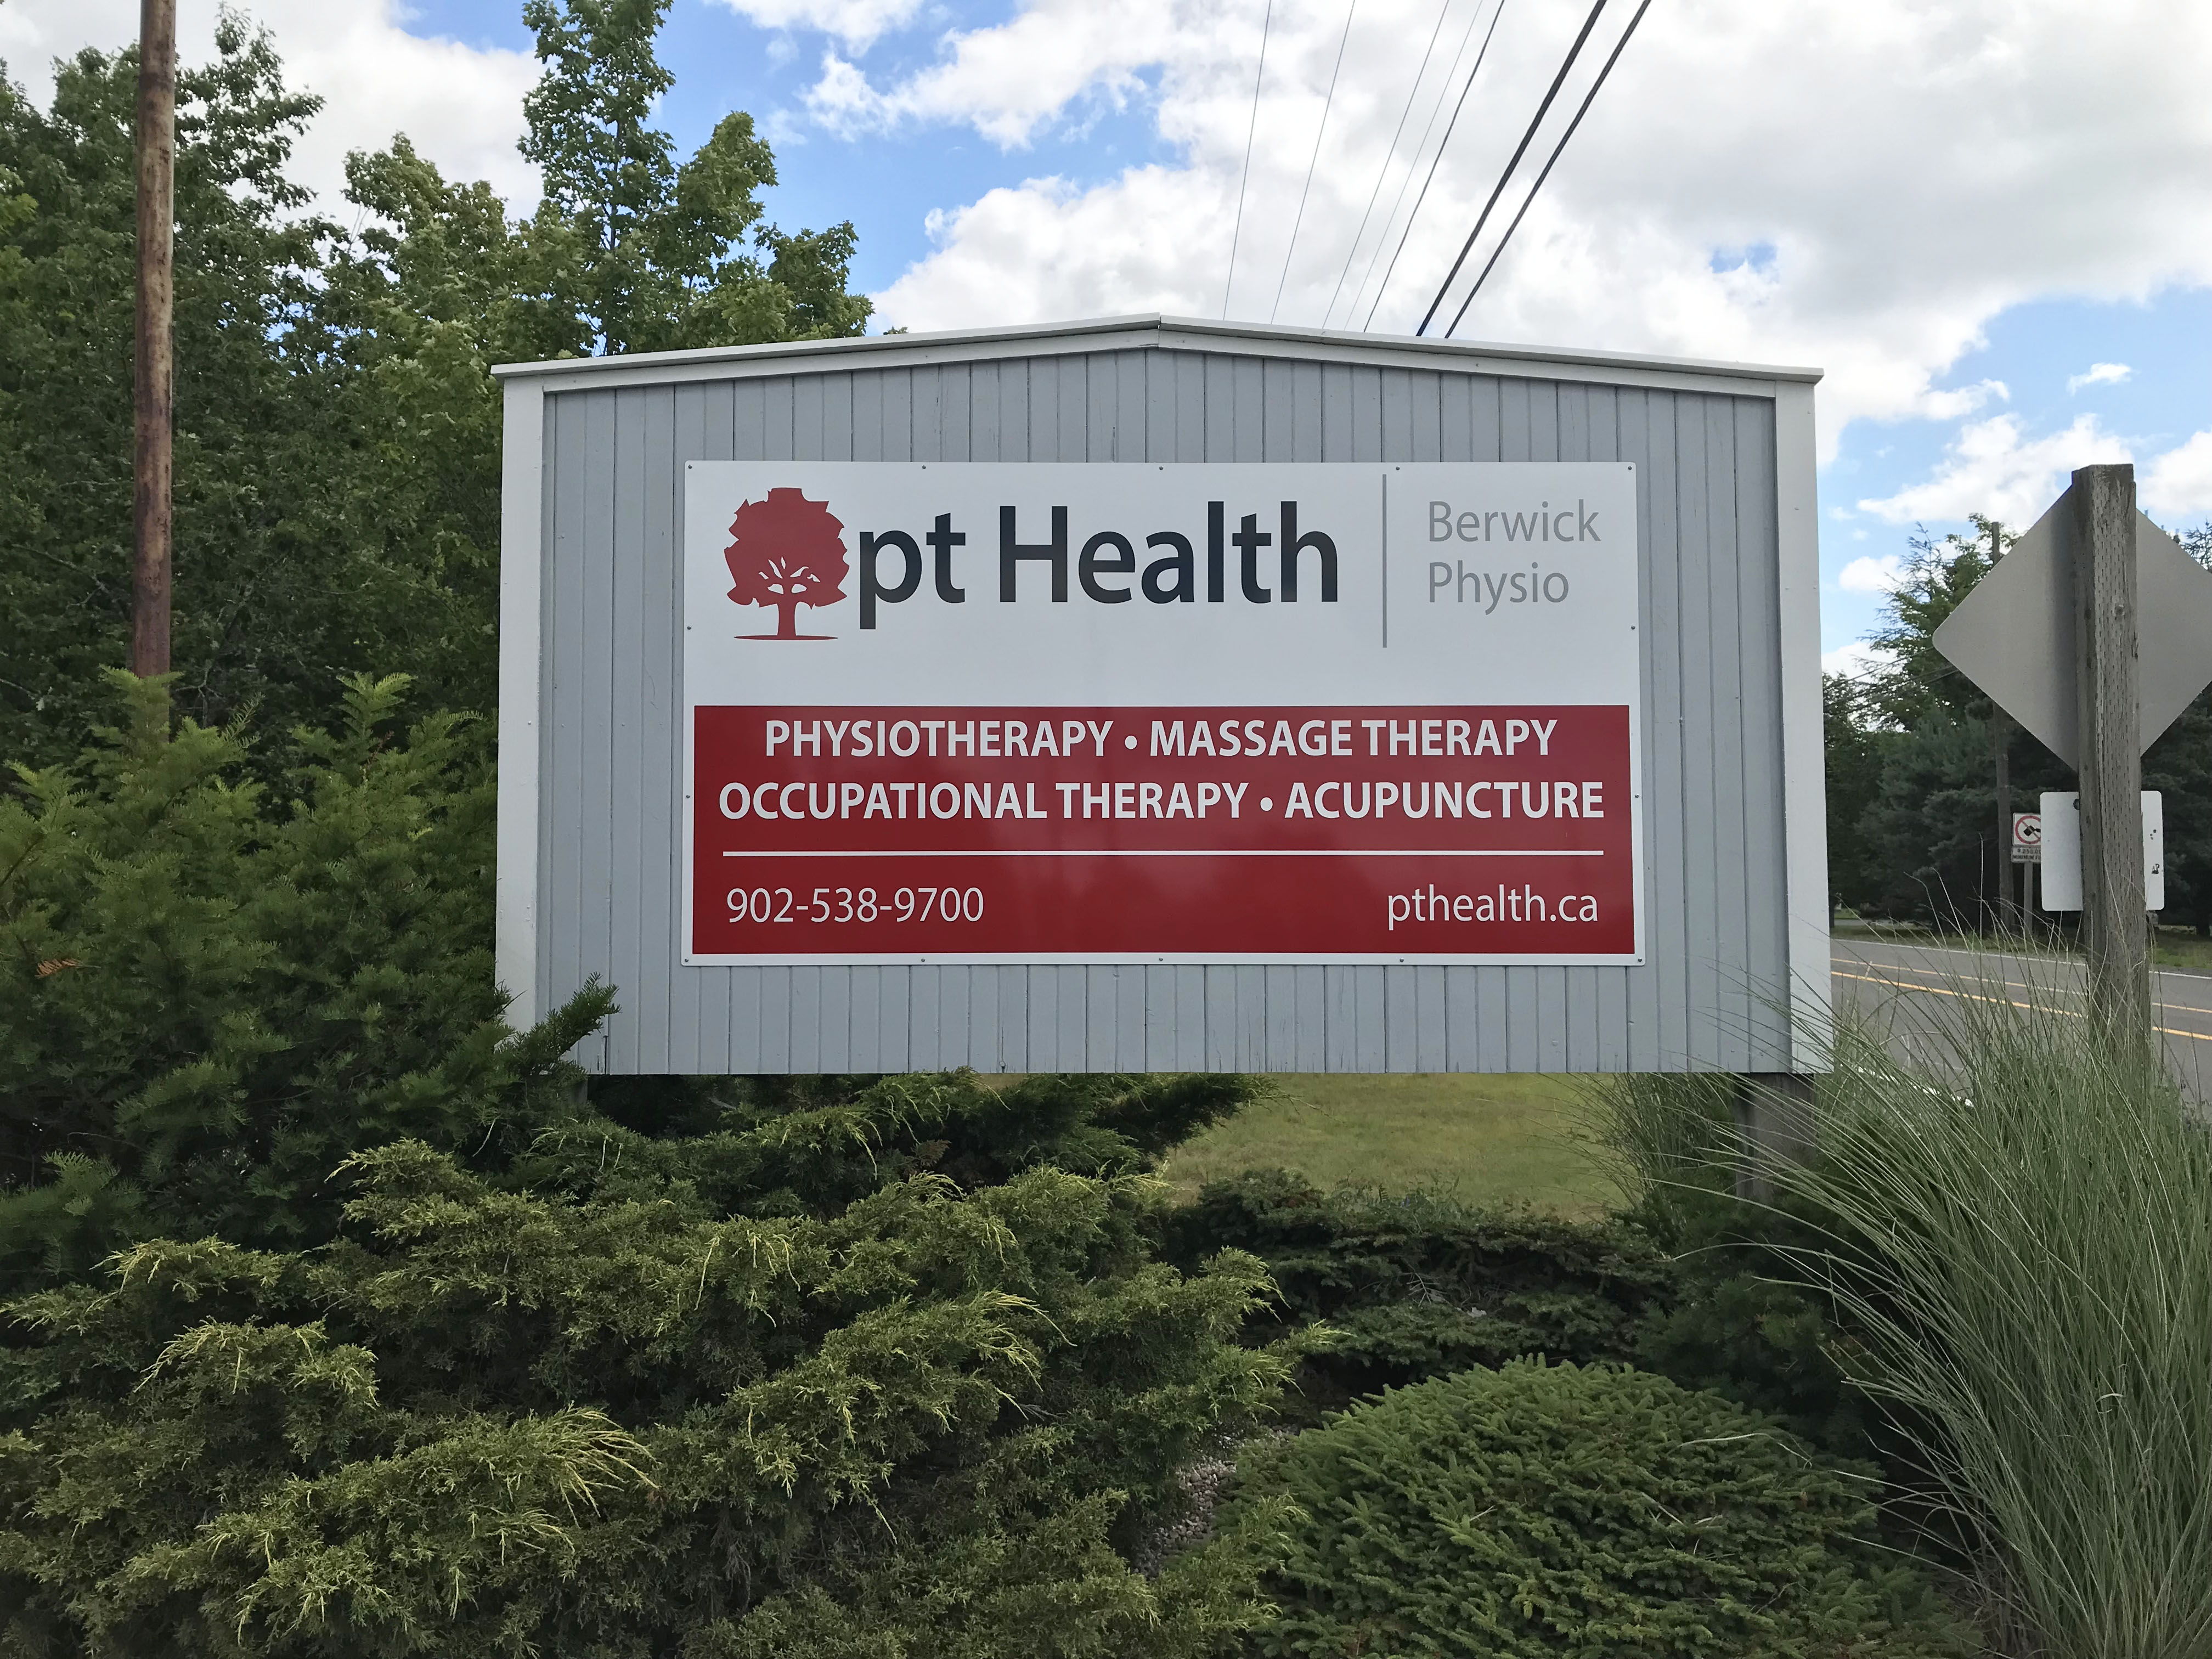 Photograph of Berwick Physiotherapy pt Health clinic's front sign